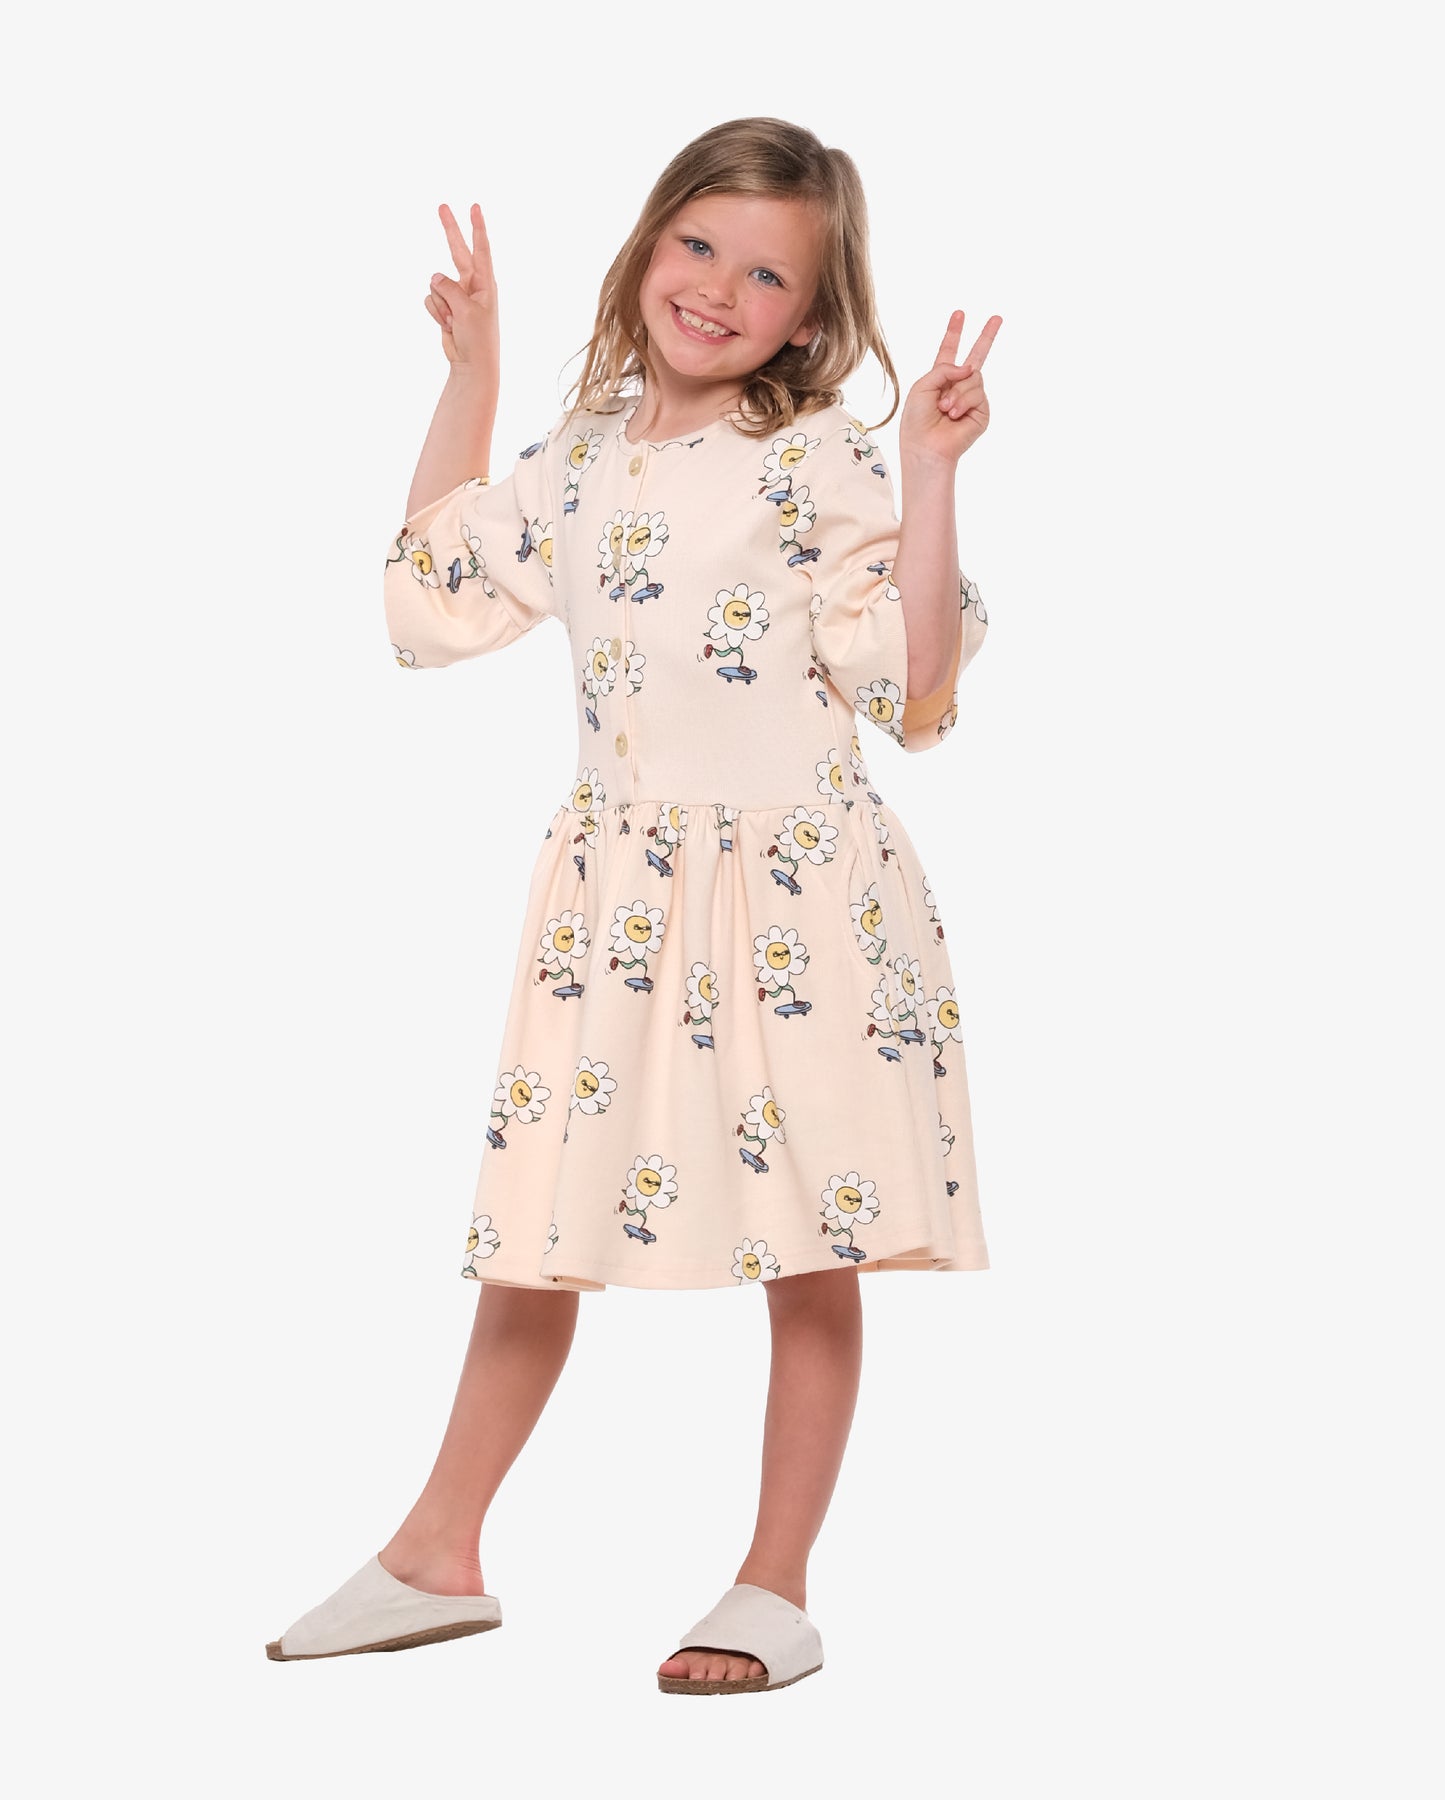 The Girl Club Daisy Skater on Repeat Dress